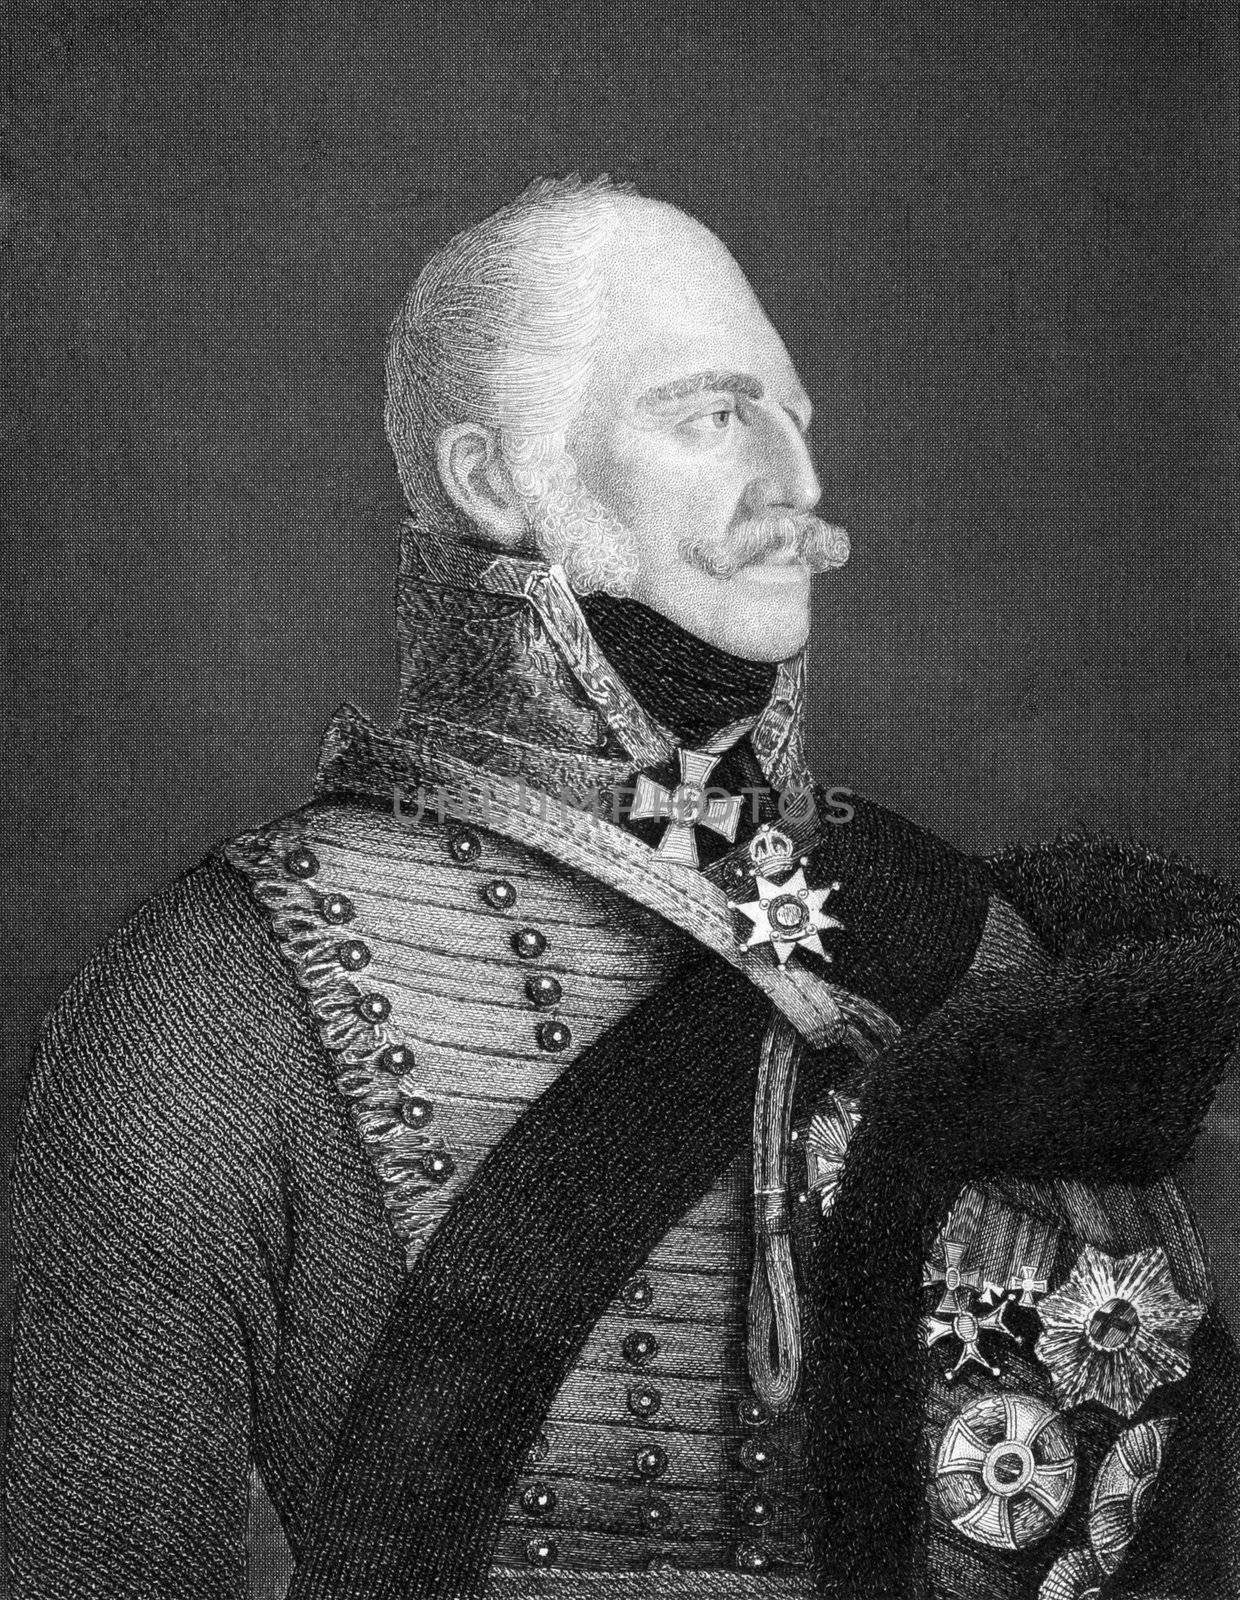 Ernest Augustus I of Hanover (1771-1851) on engraving from 1859. King of Hanover during 1837-1851. Engraved by Carl Meyer and published in Meyers Konversations-Lexikon, Germany, 1859.